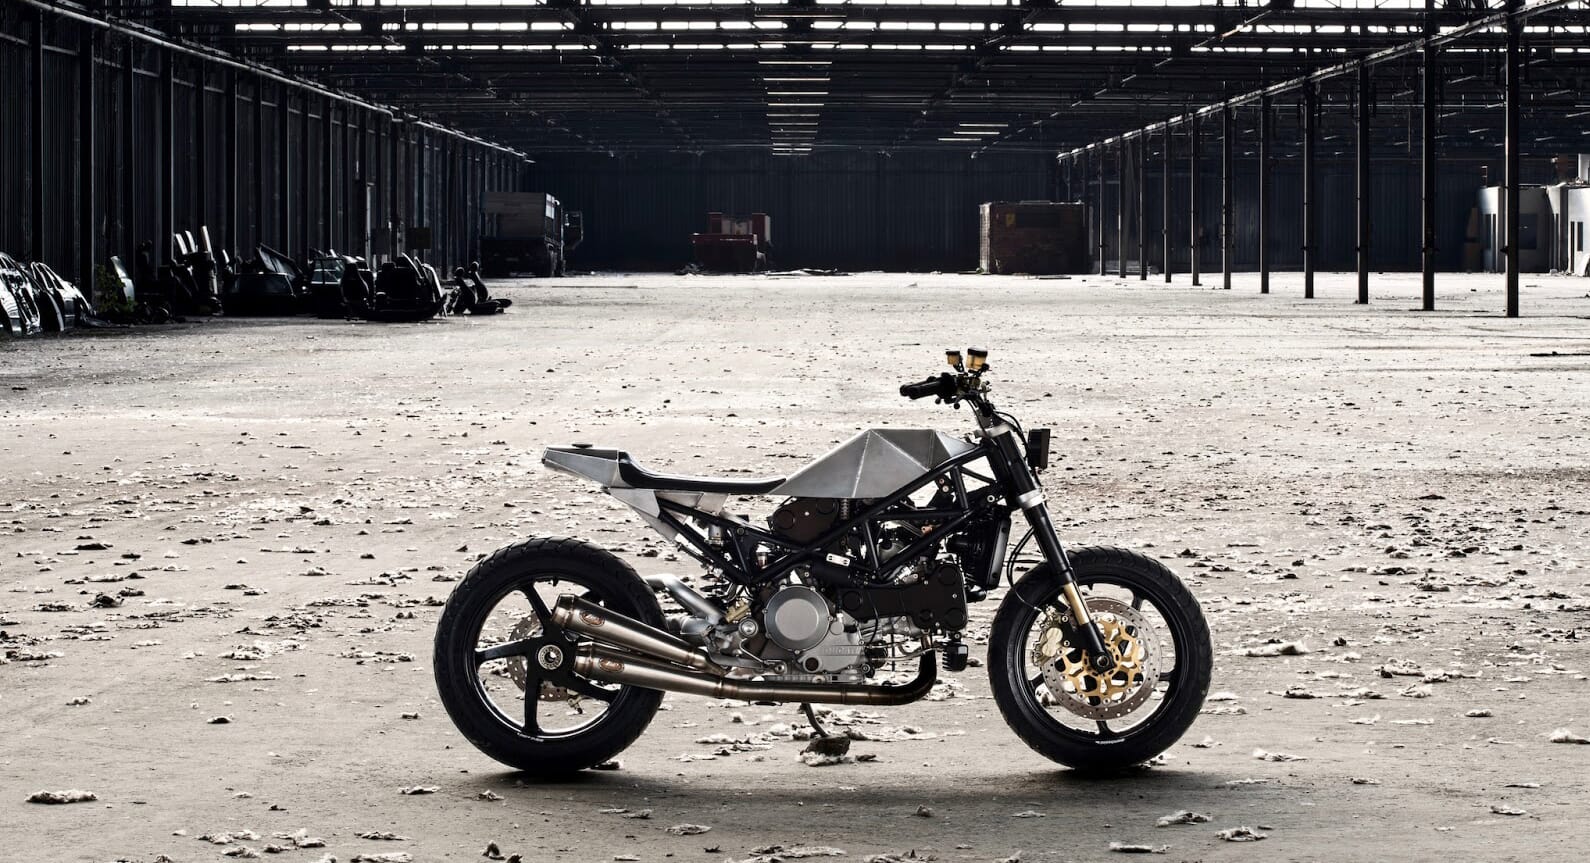 The S4R Warthog Mille Custom Motorcycle by Anvil Motociclette